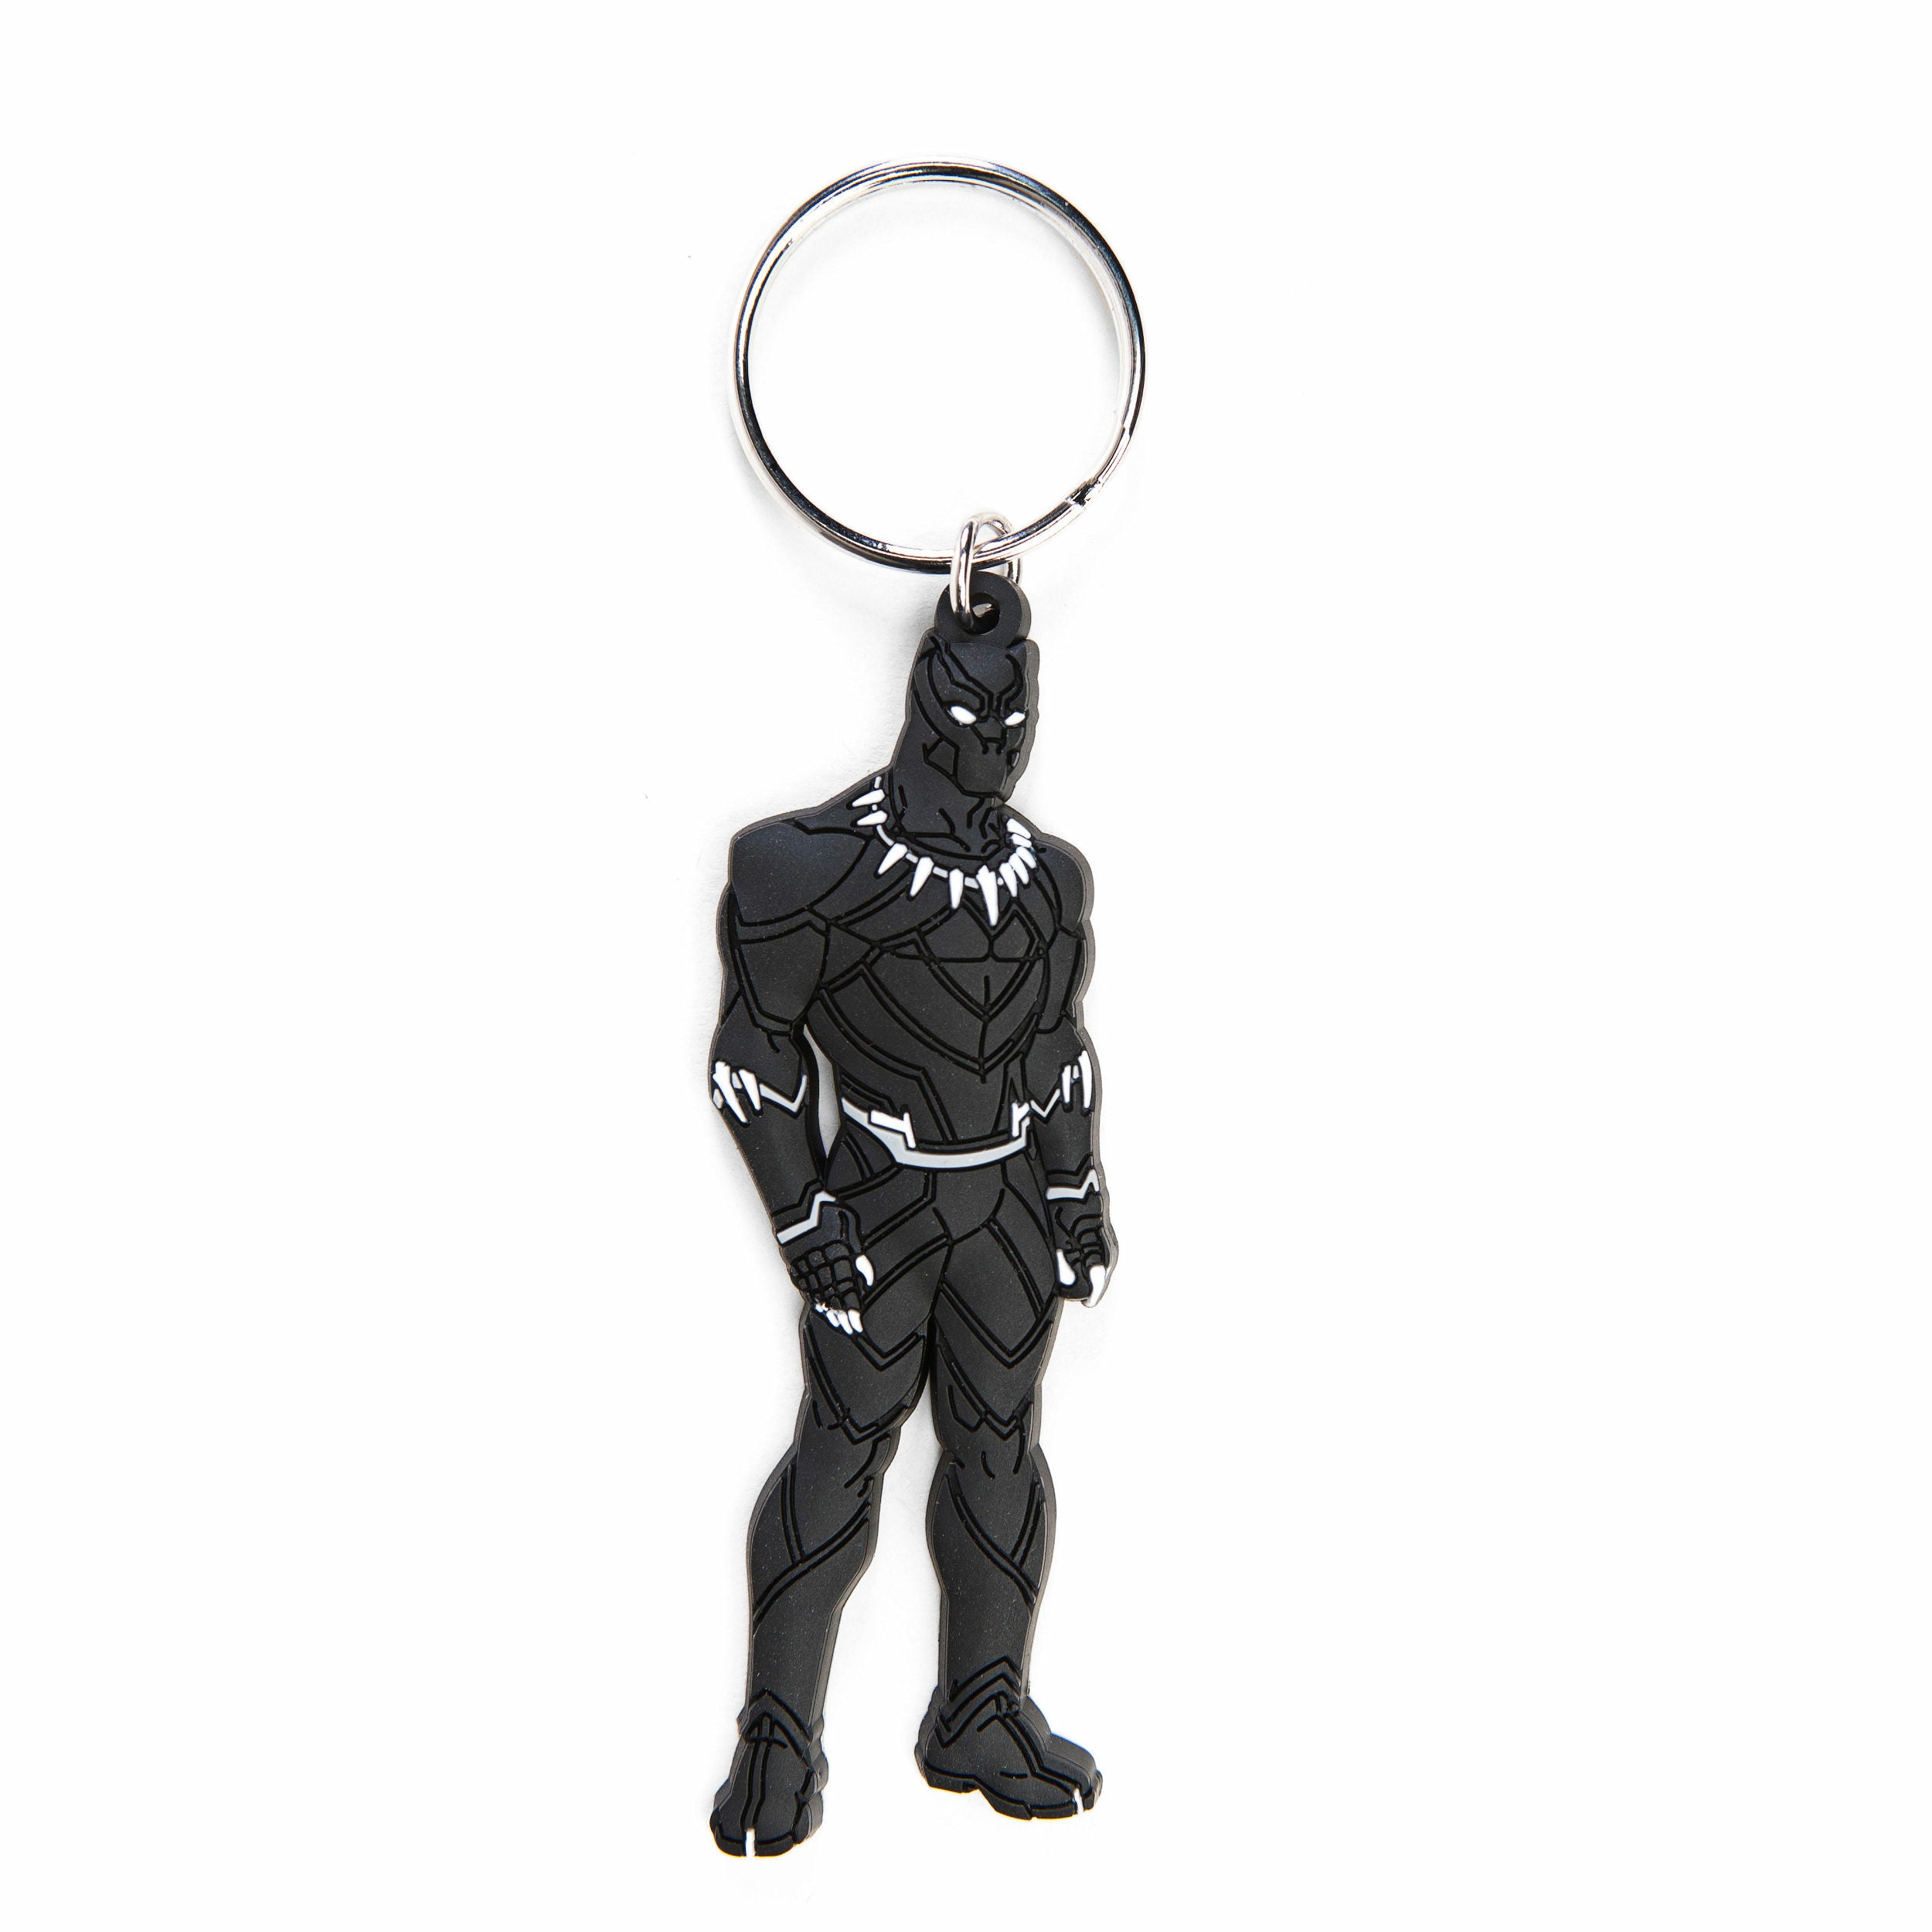 Marvel Avengers Black Panther Soft Touch PVC Keychain